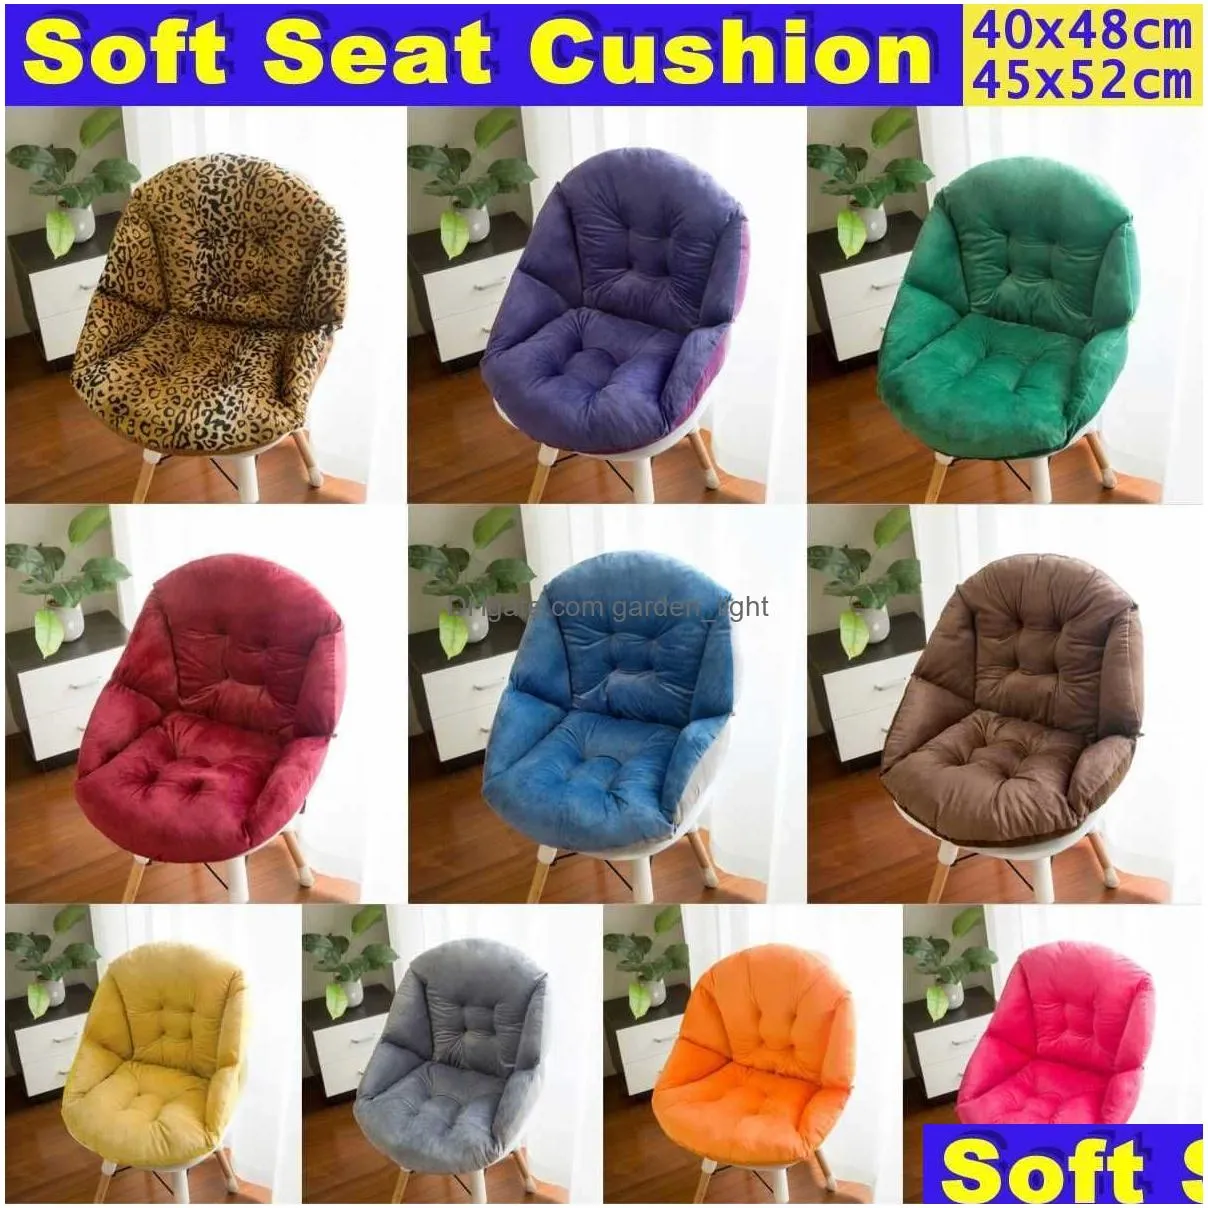 thick warm seat cushion orthopedic pillow home office chair cushion semienclosed cushion car seat pad sets dining chair 2107166045200